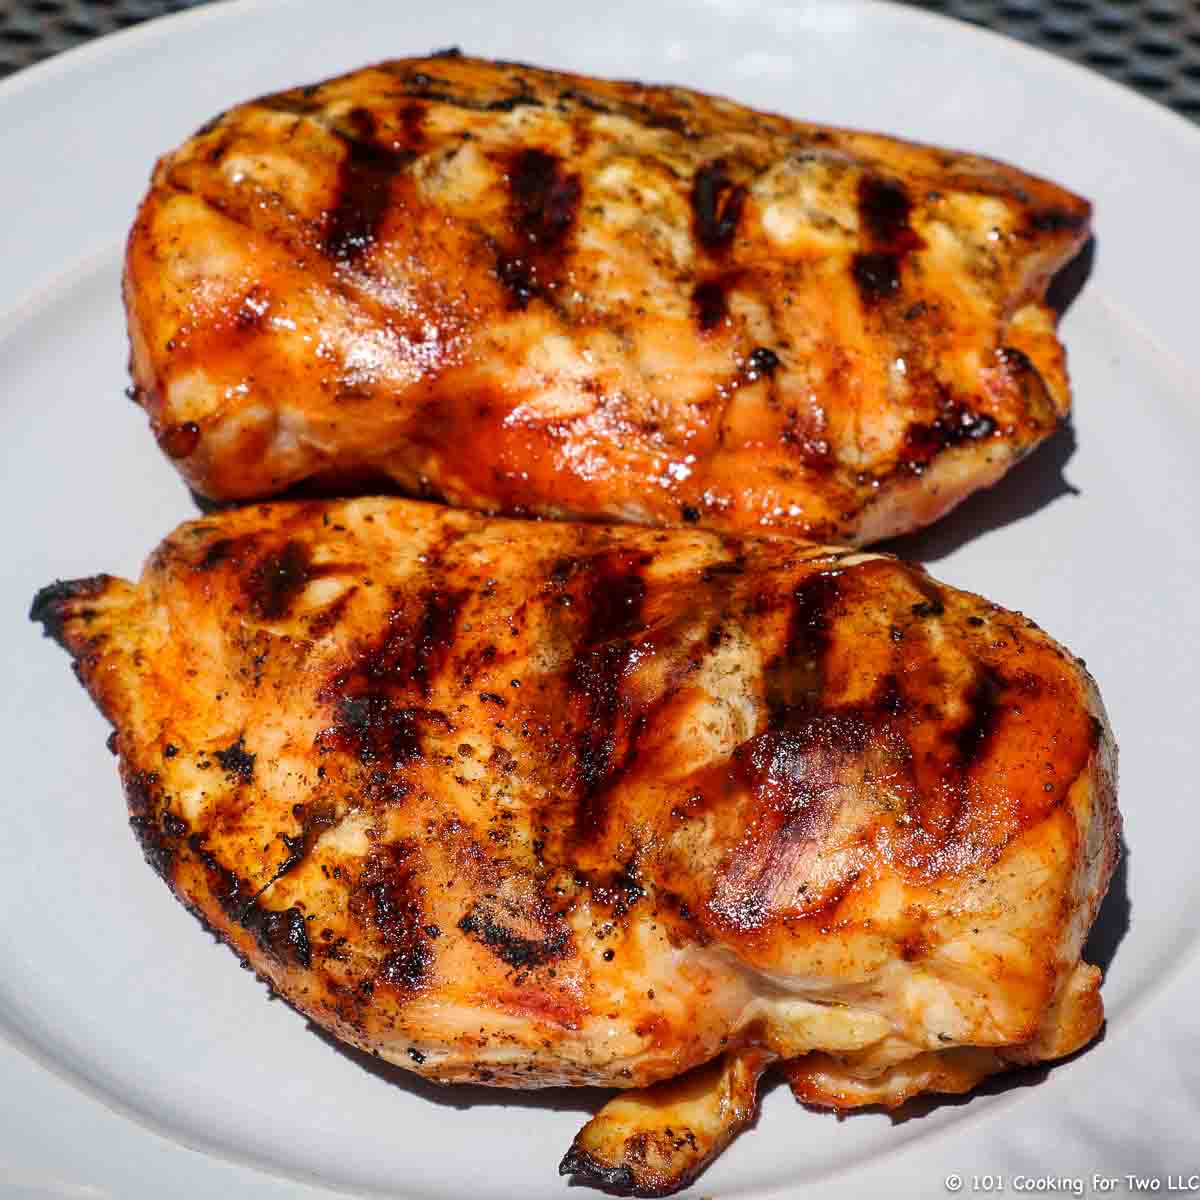 Boneless Chicken Breasts
 How to BBQ Skinless Boneless Chicken Breast on a Gas Grill